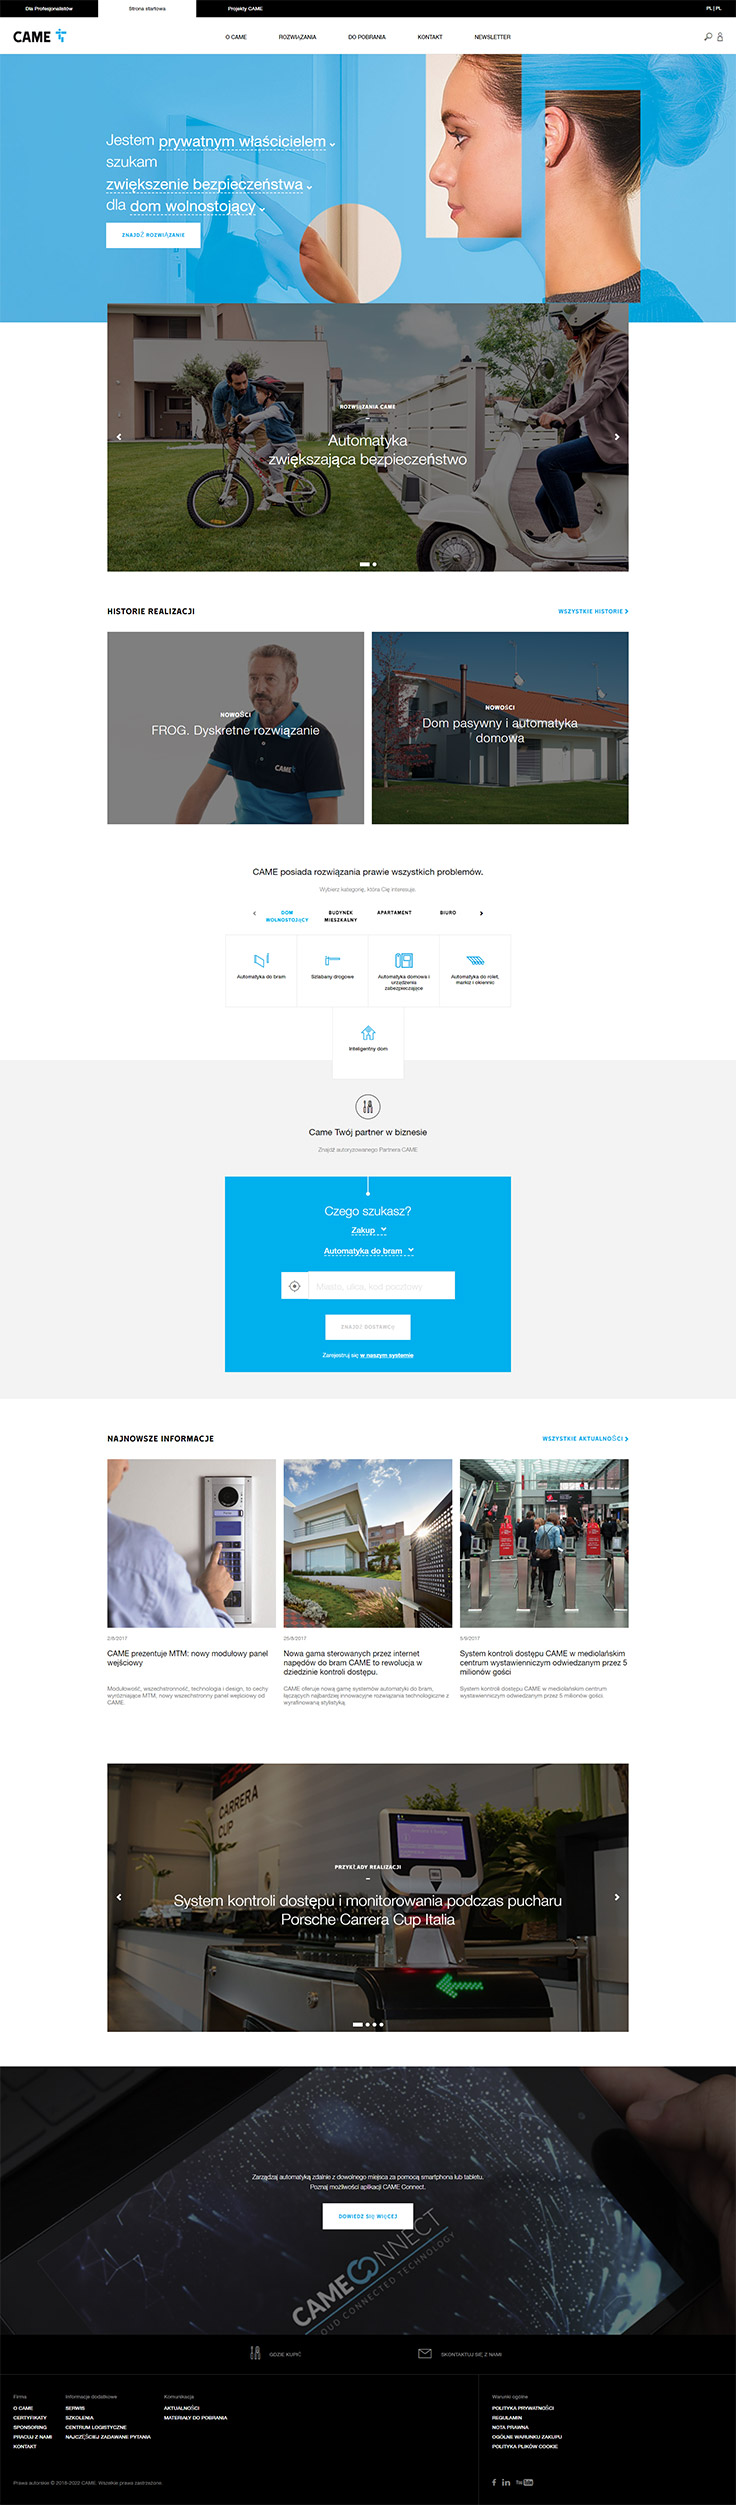 Webdesign - Came, home page